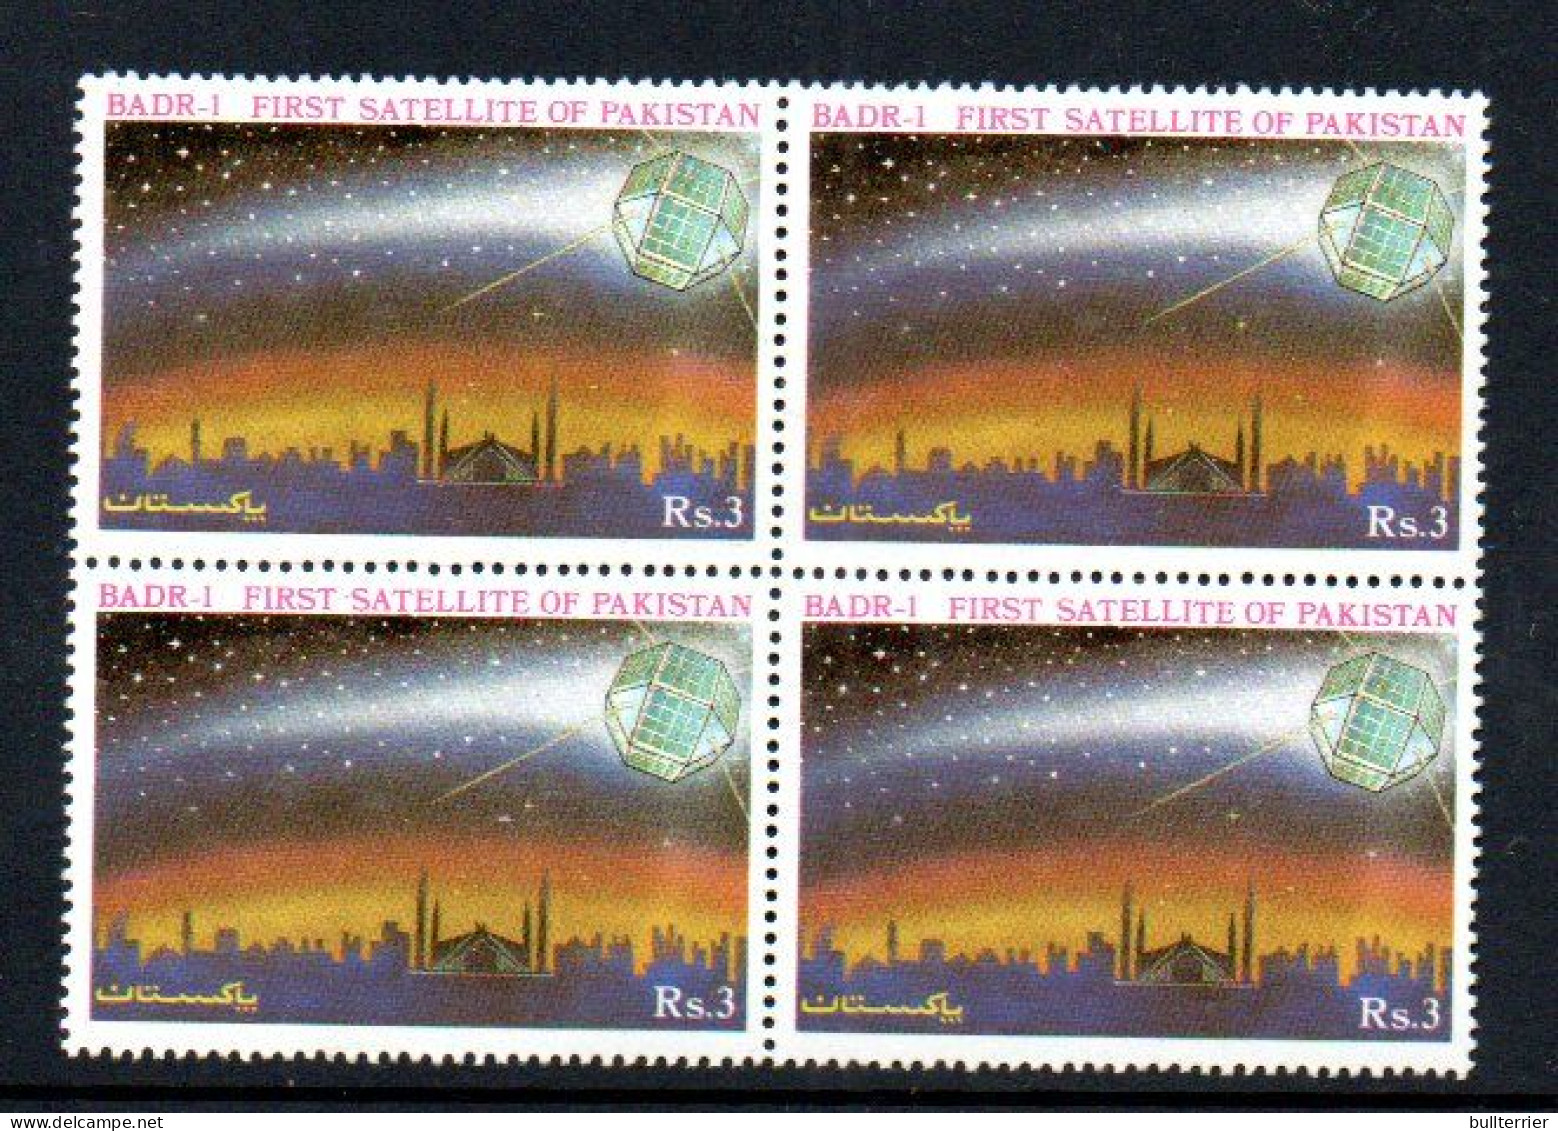 SPACE - PAKISTAN - 1990 - LAUNCHING OF BADR 1 FIRST SATELLITTEE BLOCK OF 4  MINT NEVER HINGED, SG CAT £14 - Asia